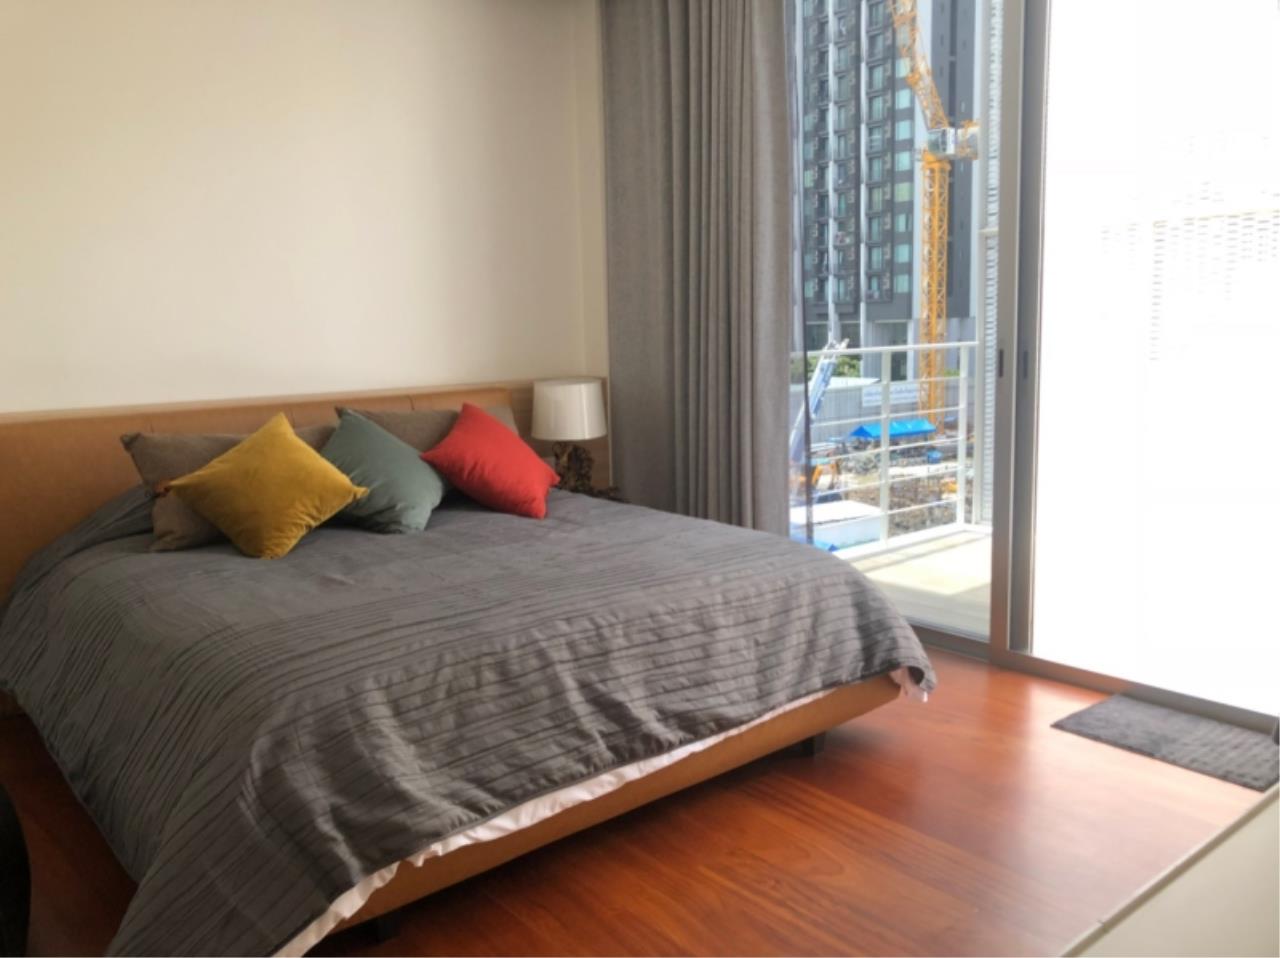 Century21 Skylux Agency's 33 Serviced Apartment / Apartment (Serviced) For Rent / 2 Bedroom / 110 SQM / BTS Asok / Bangkok 1